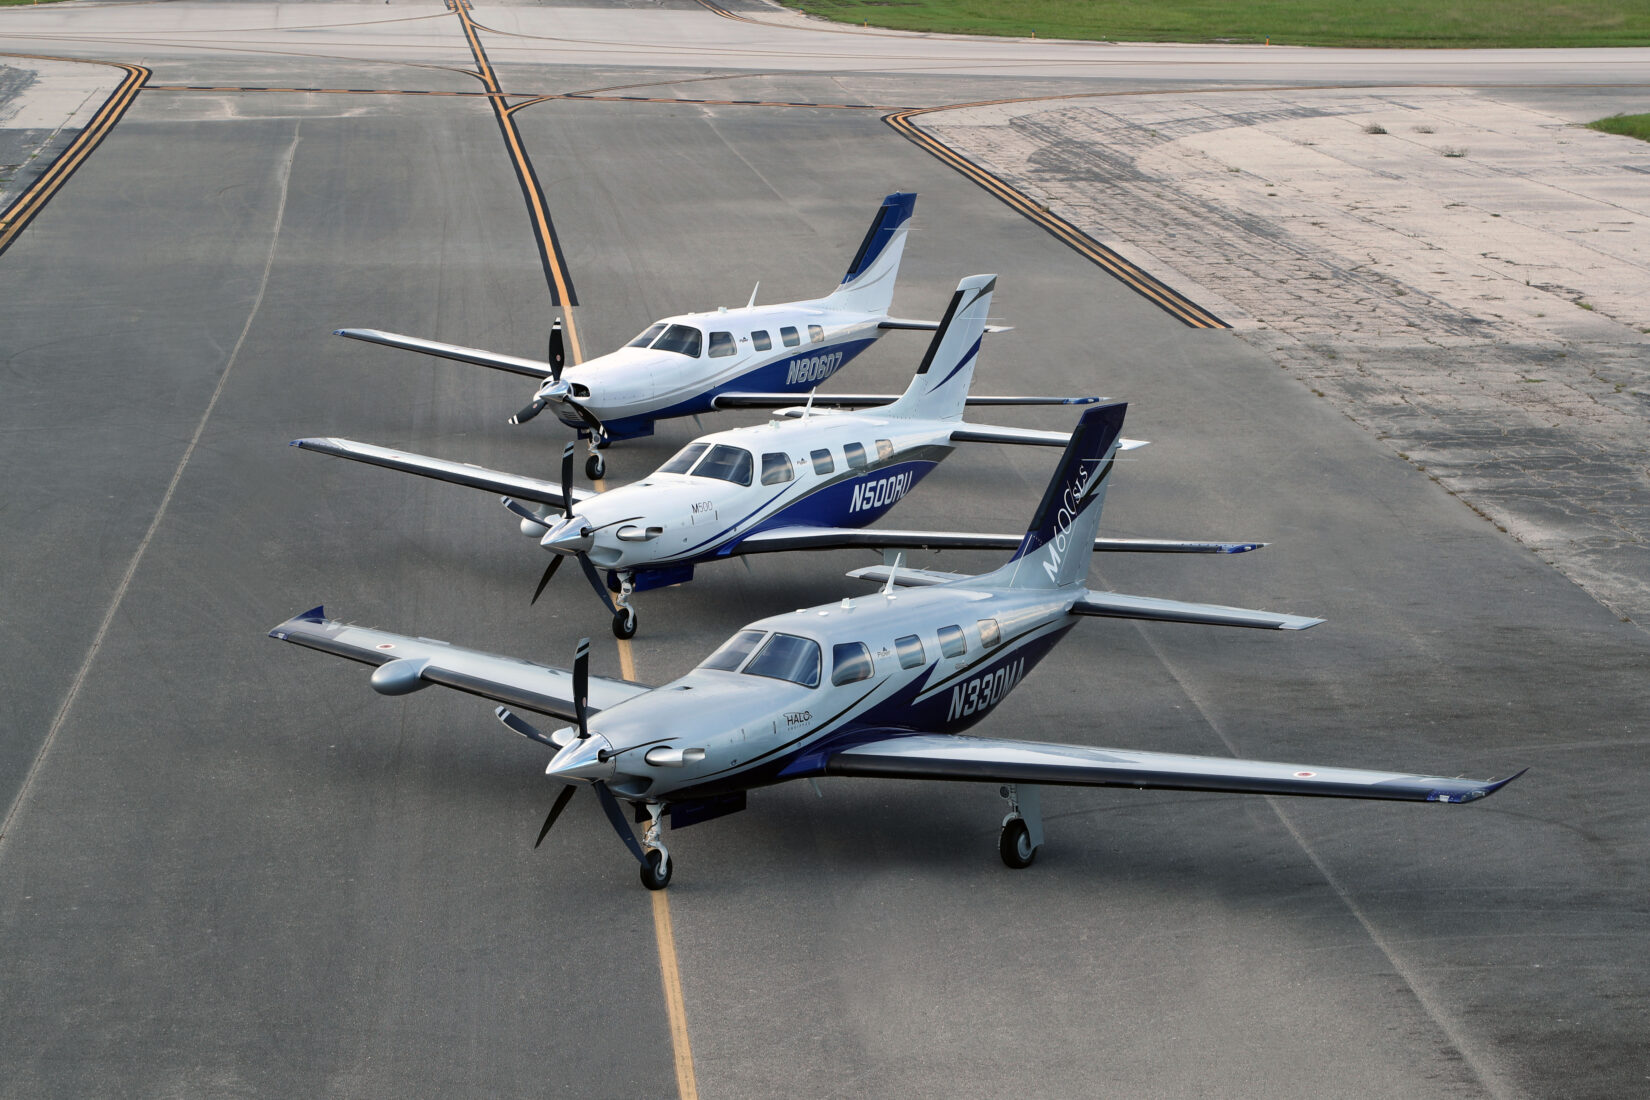 Line of the M Class Piper aircraft on a tarmac